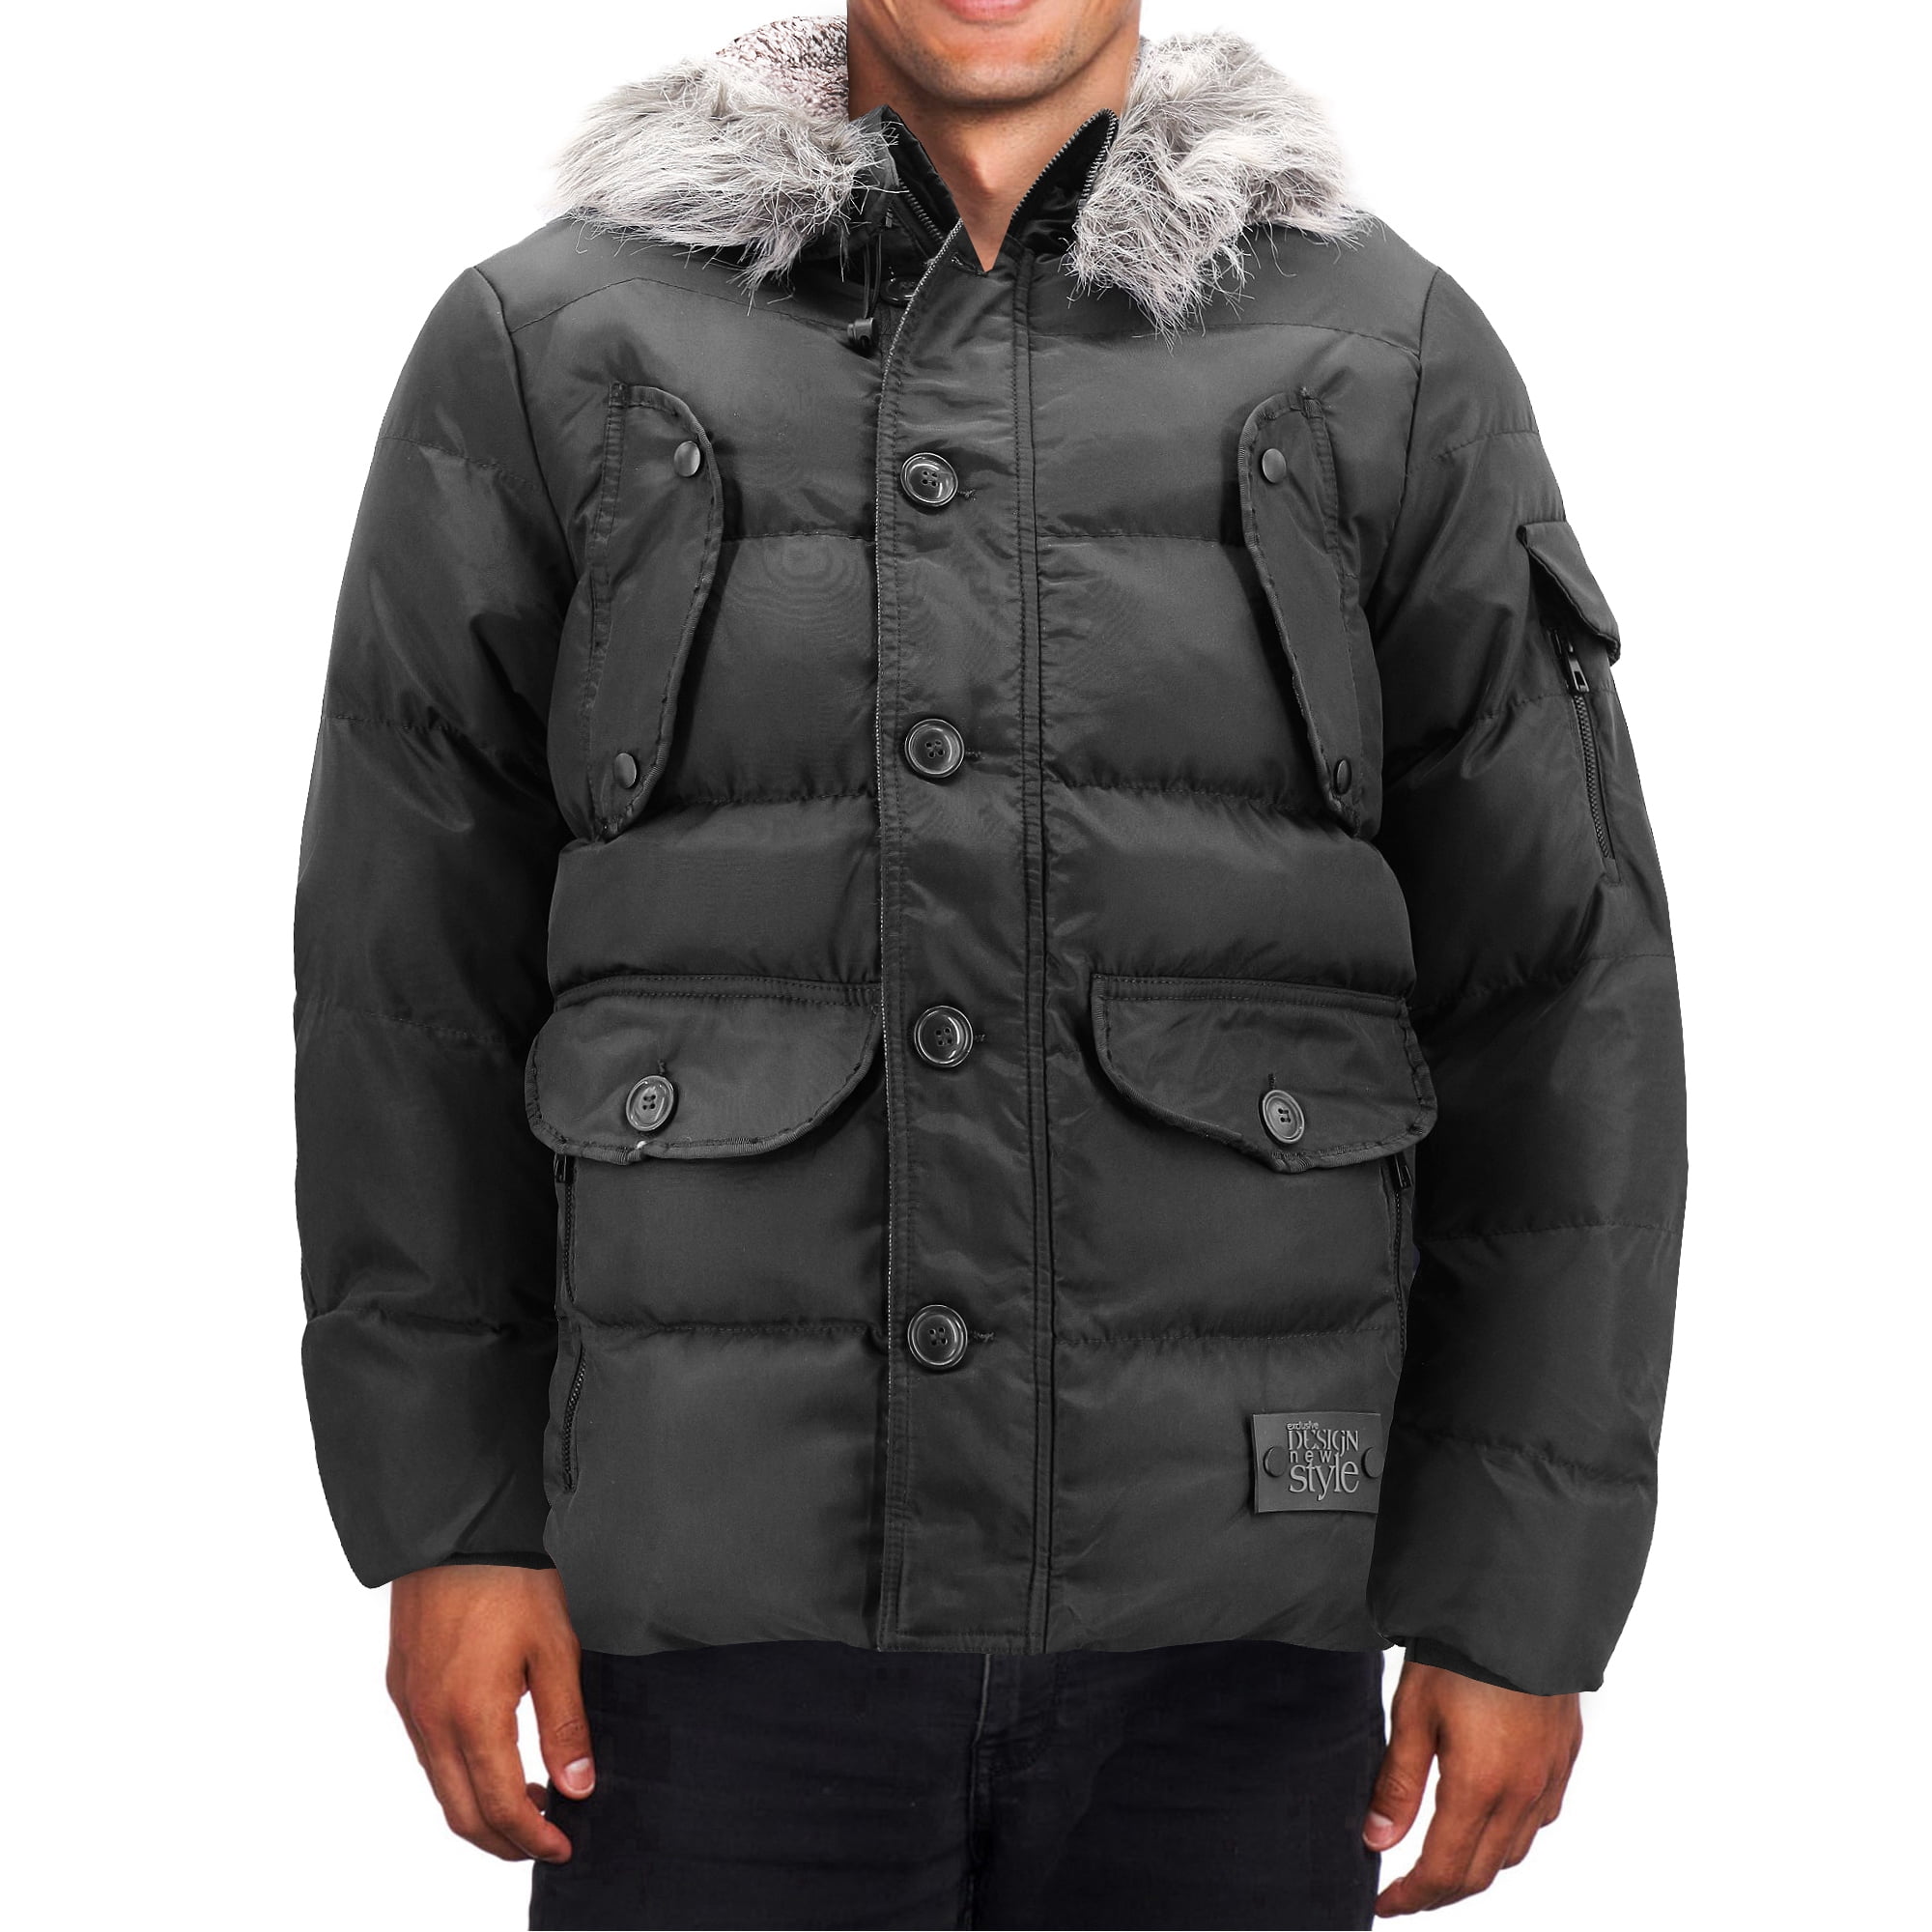 Landscap Men's Winter Cotton Jacket Thickening Warm Cotton Padded Coat Snow Puffer Jacket Quilted Down Jacket 